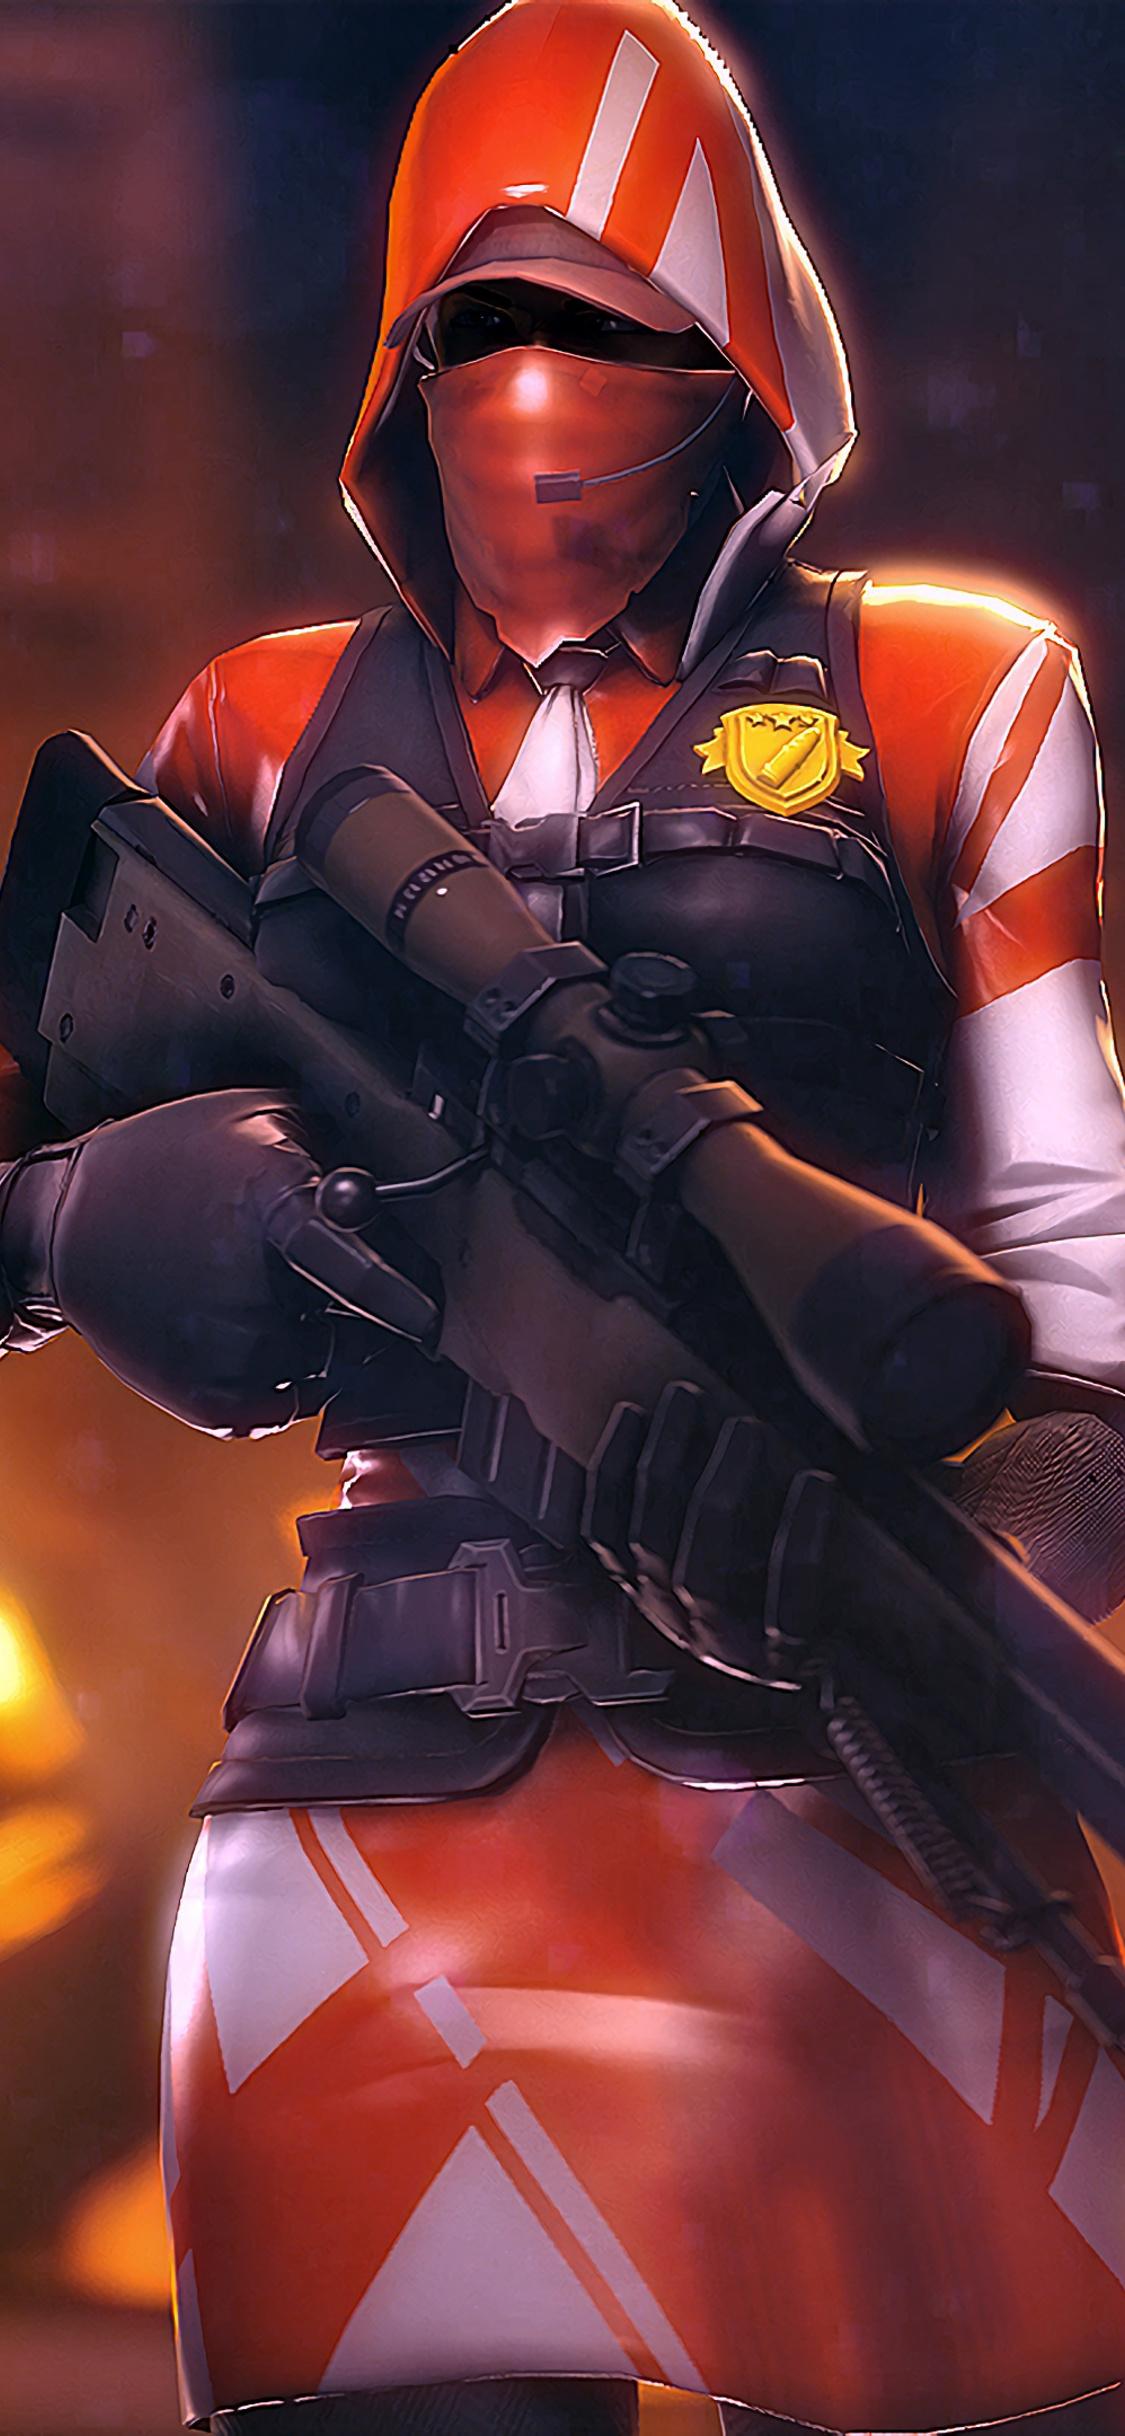 Ace Sniper Outfit Fortnite iPhone Background Wallpaper